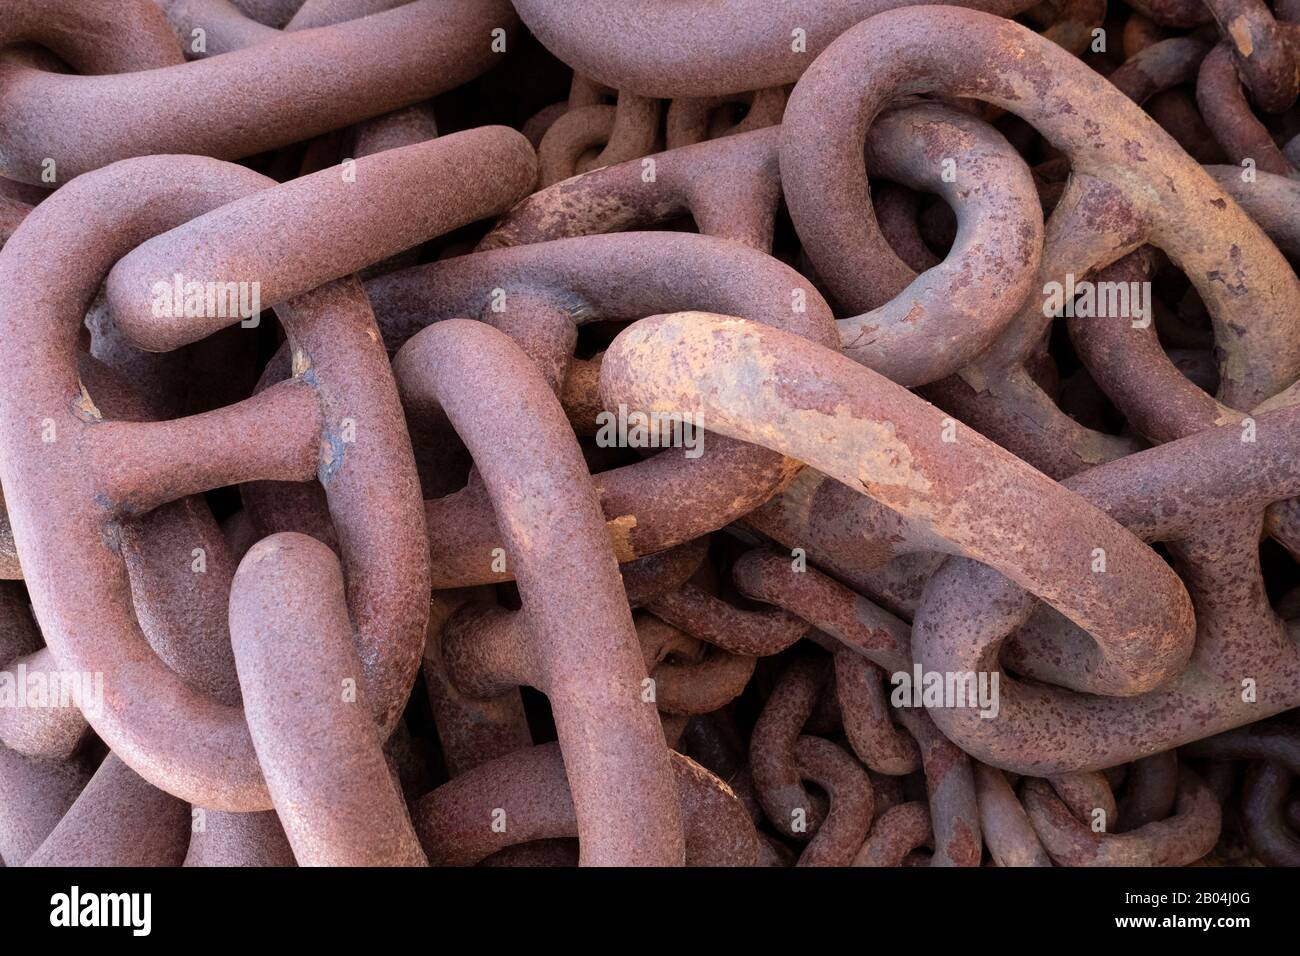 Old heavy rusty ships chain close up Stock Photo